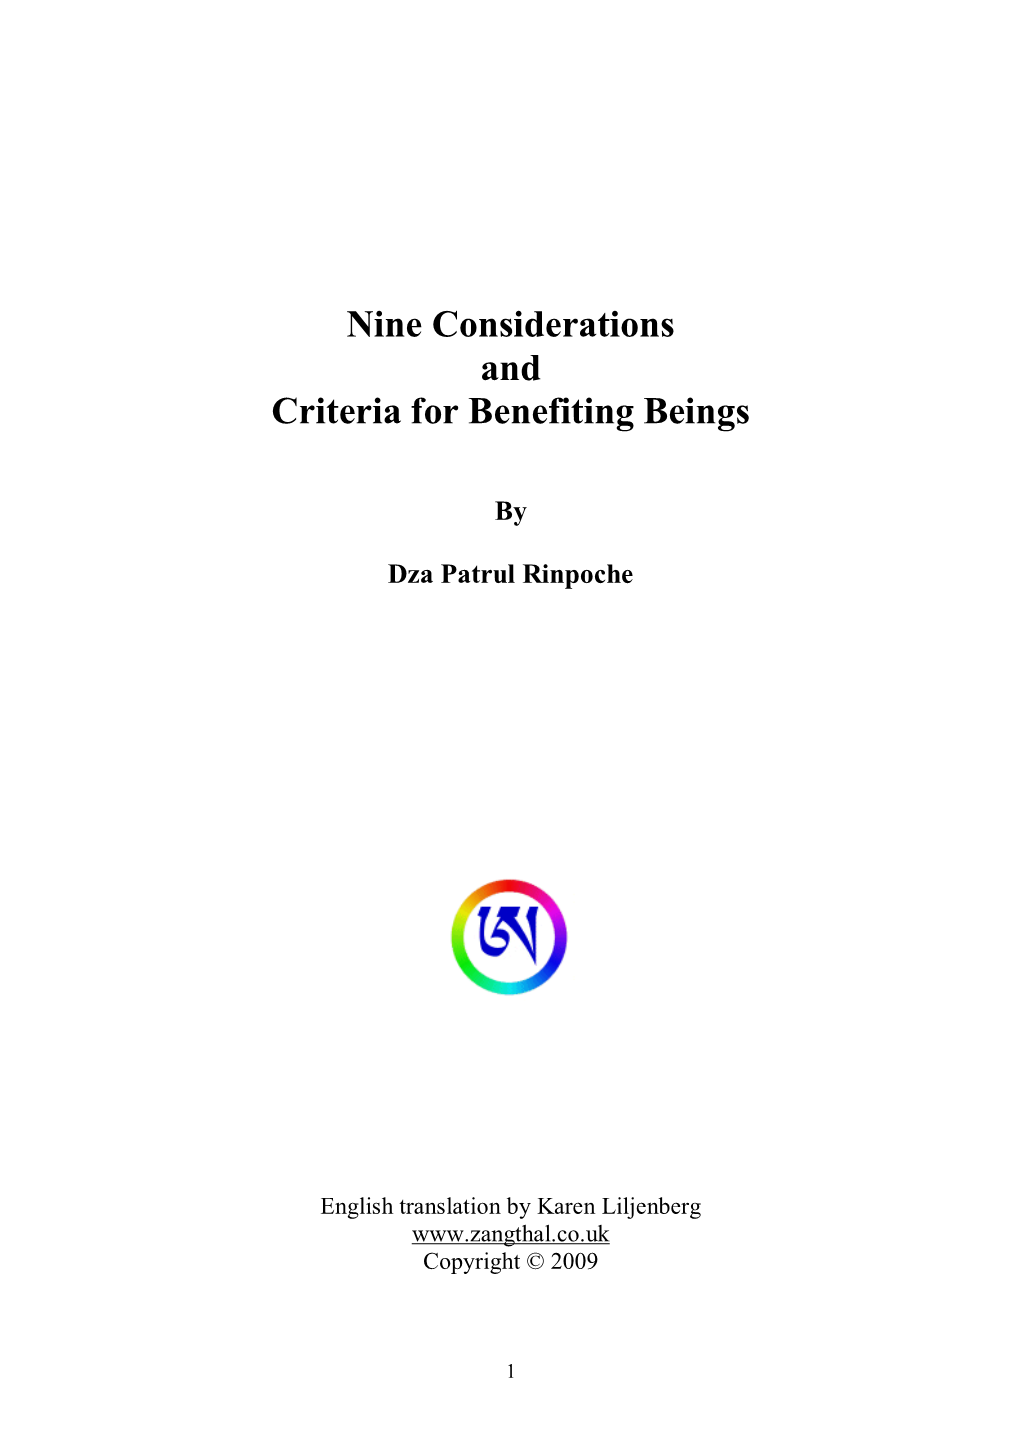 Nine Considerations and Criteria for Benefiting Beings